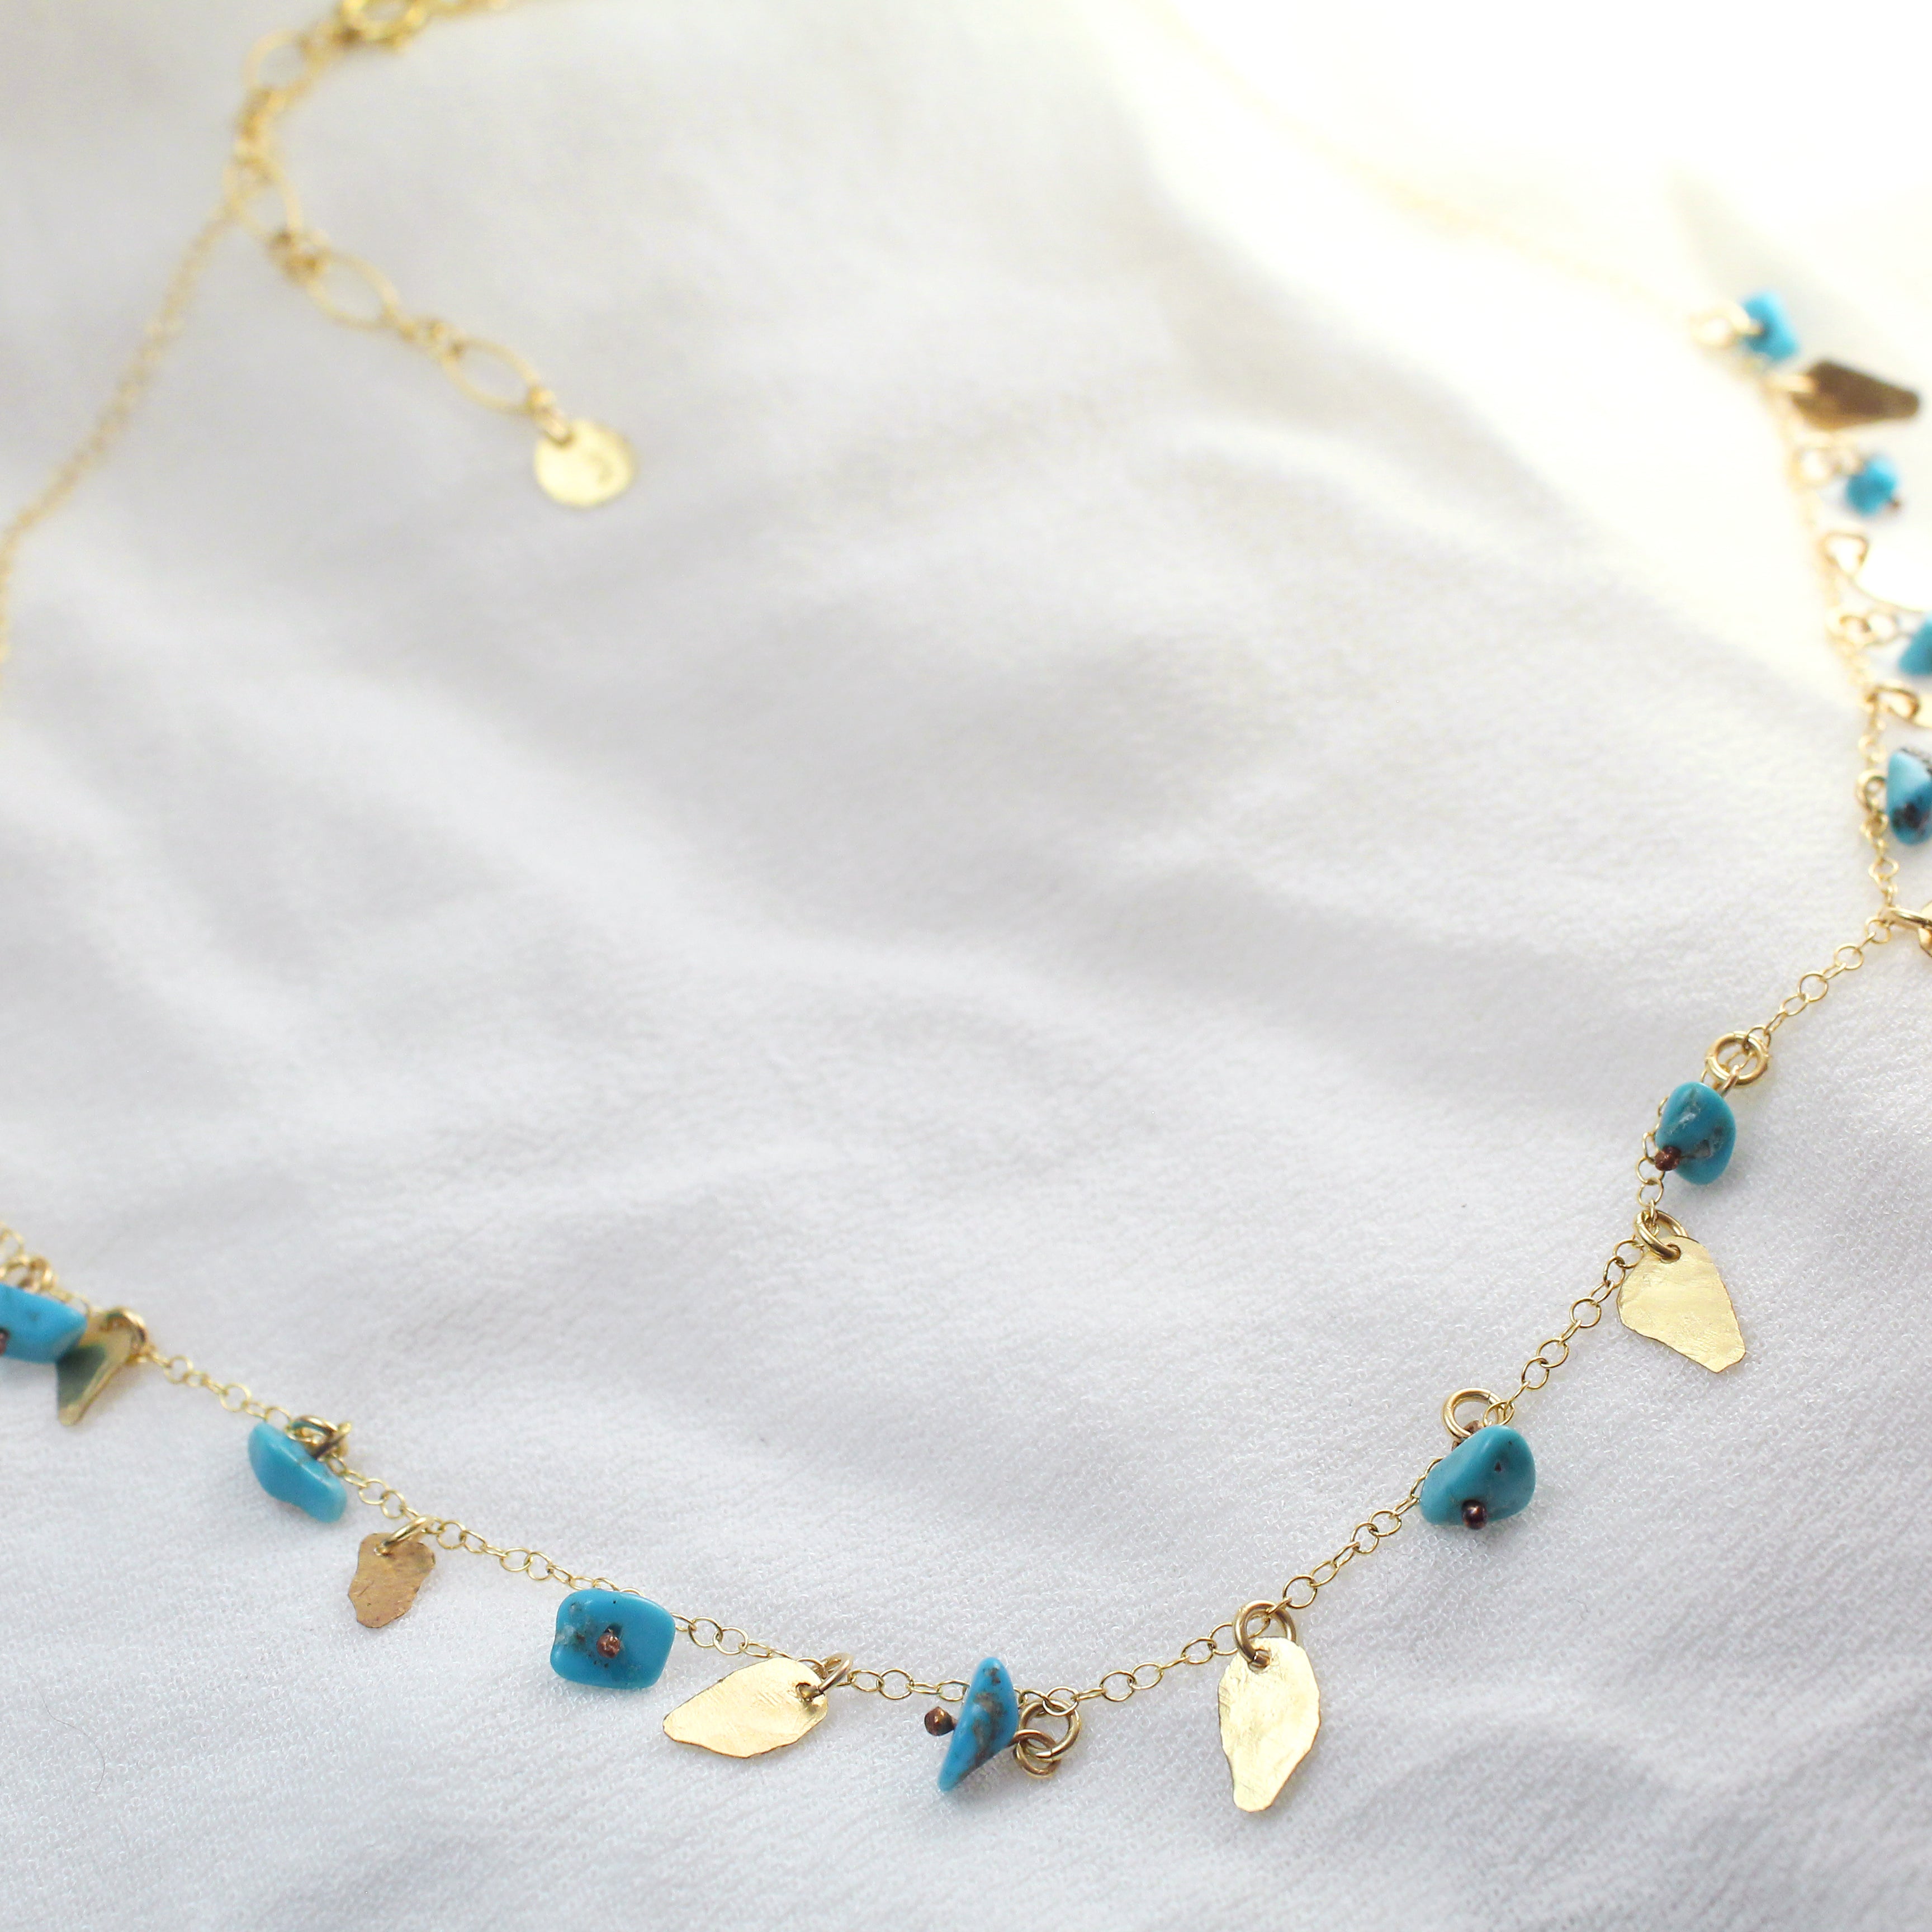 Golden Leaves - Gold-Filled Leaves & Turquoise Gemstone Necklace